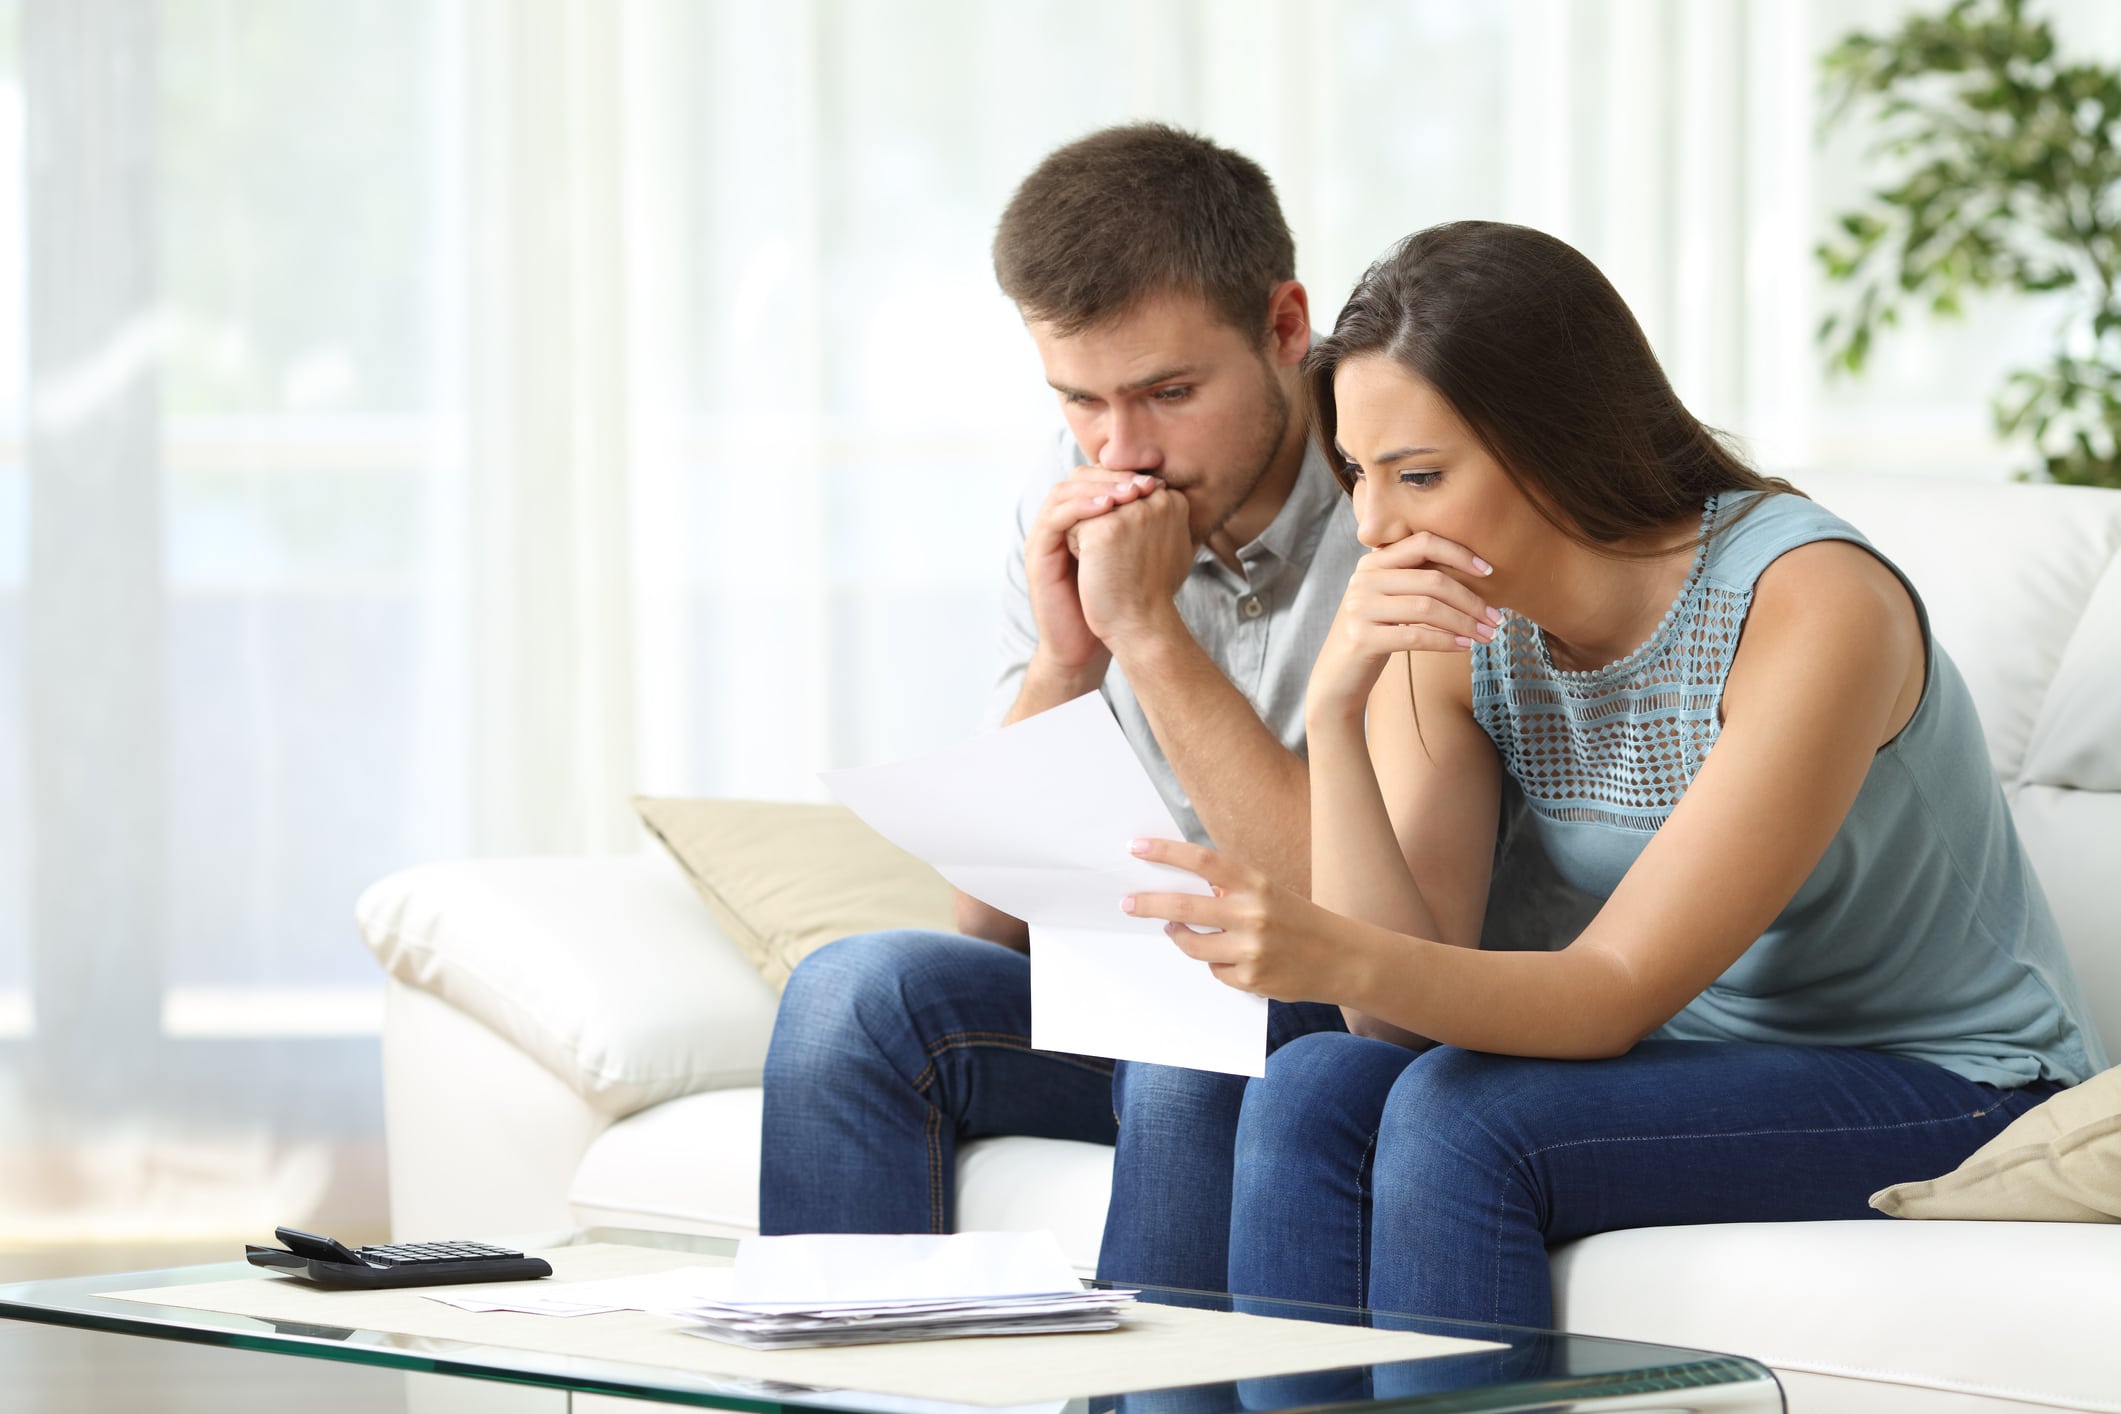 average household credit card debt. Worried couple reading an important notification in a letter sitting on a couch in the living room at home.